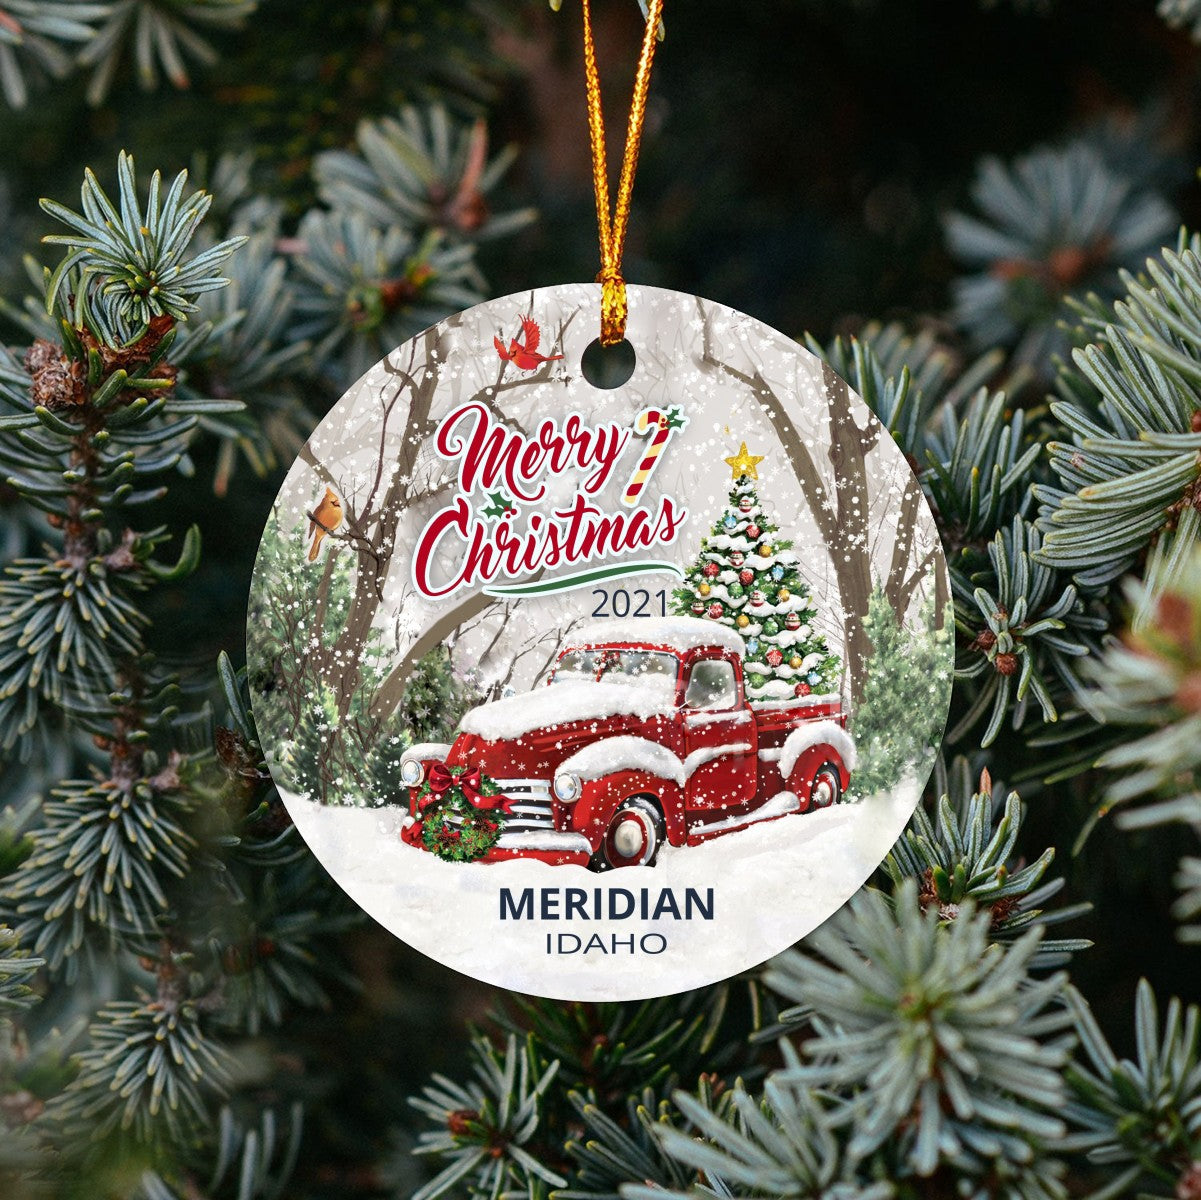 Christmas Tree Ornaments Meridian - Ornament Customize With Name City And State Meridian Idaho ID - Red Truck Xmas Ornaments 3'' Plastic Gift For Family, Friend And Housewarming